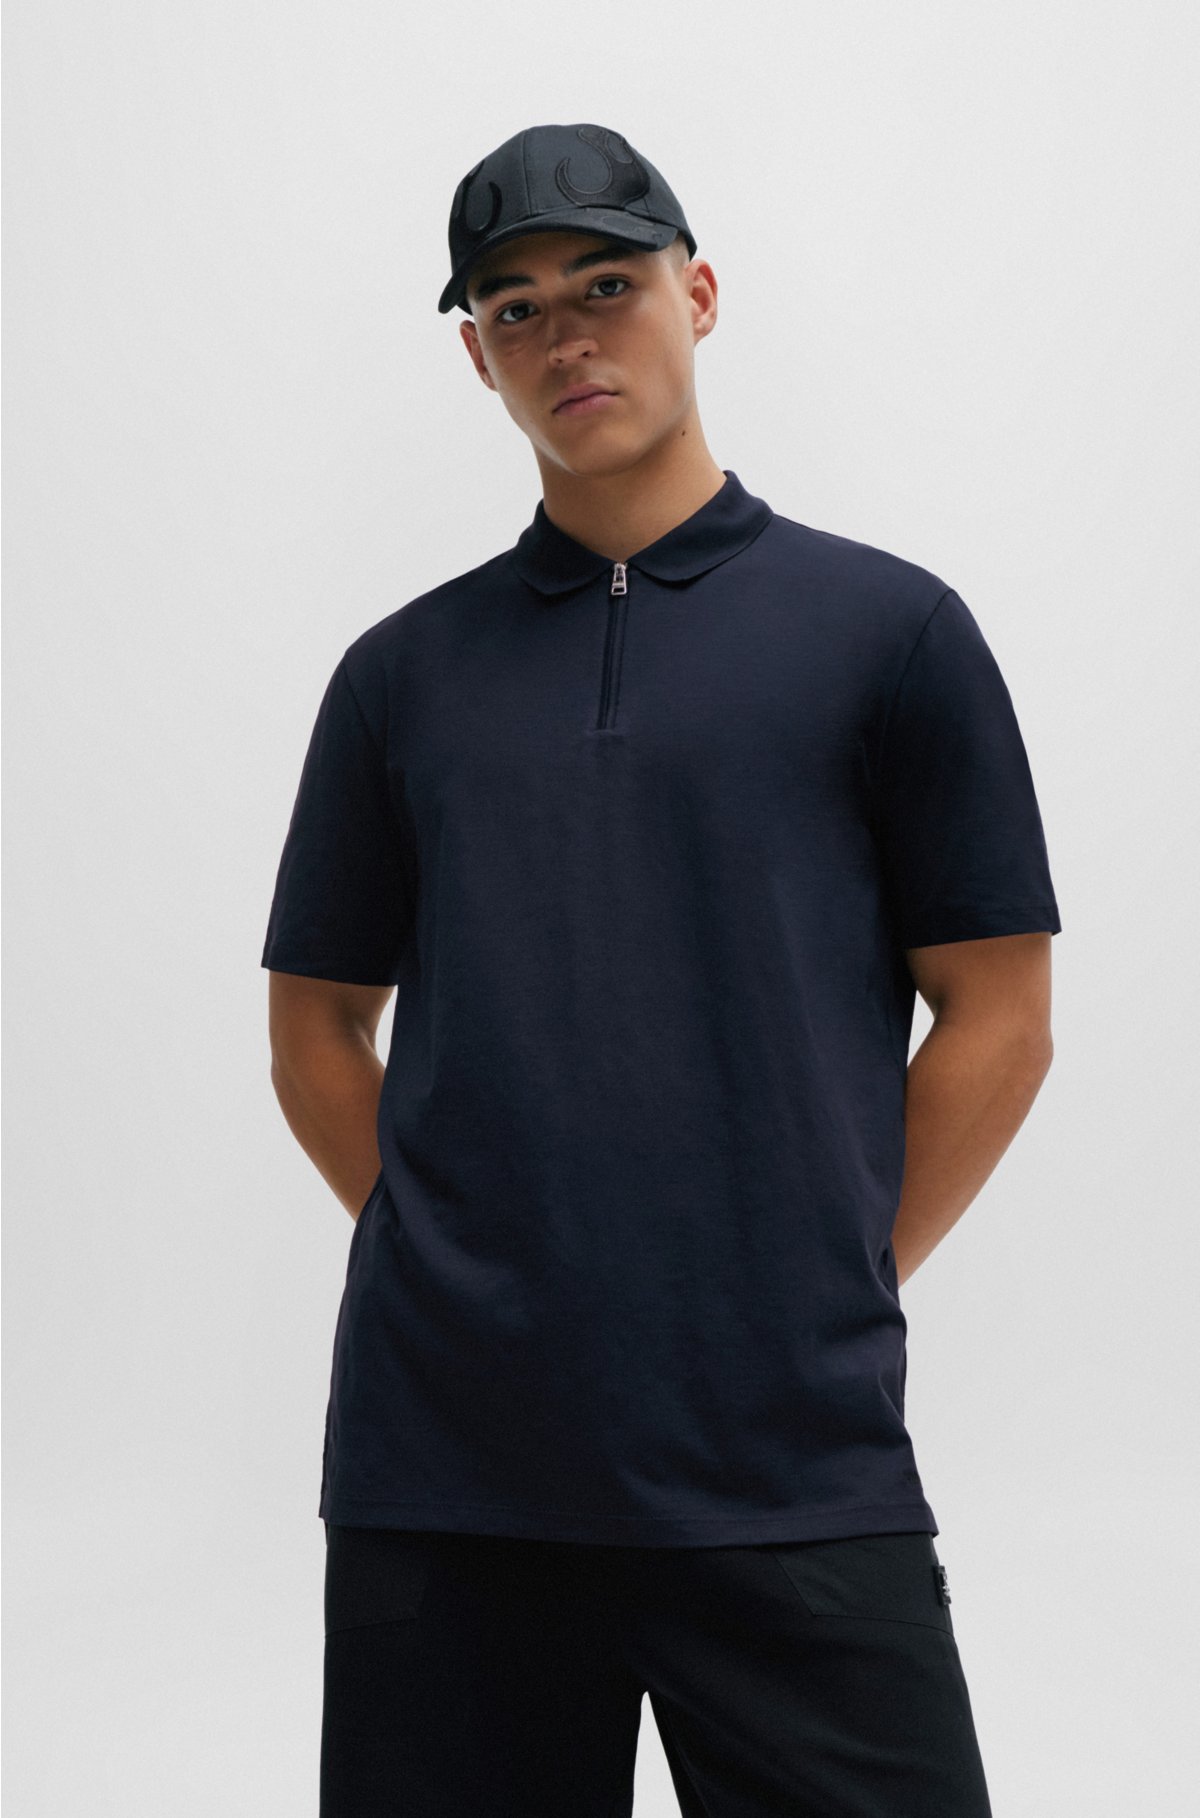 placket Cotton-blend with zip - shirt polo HUGO